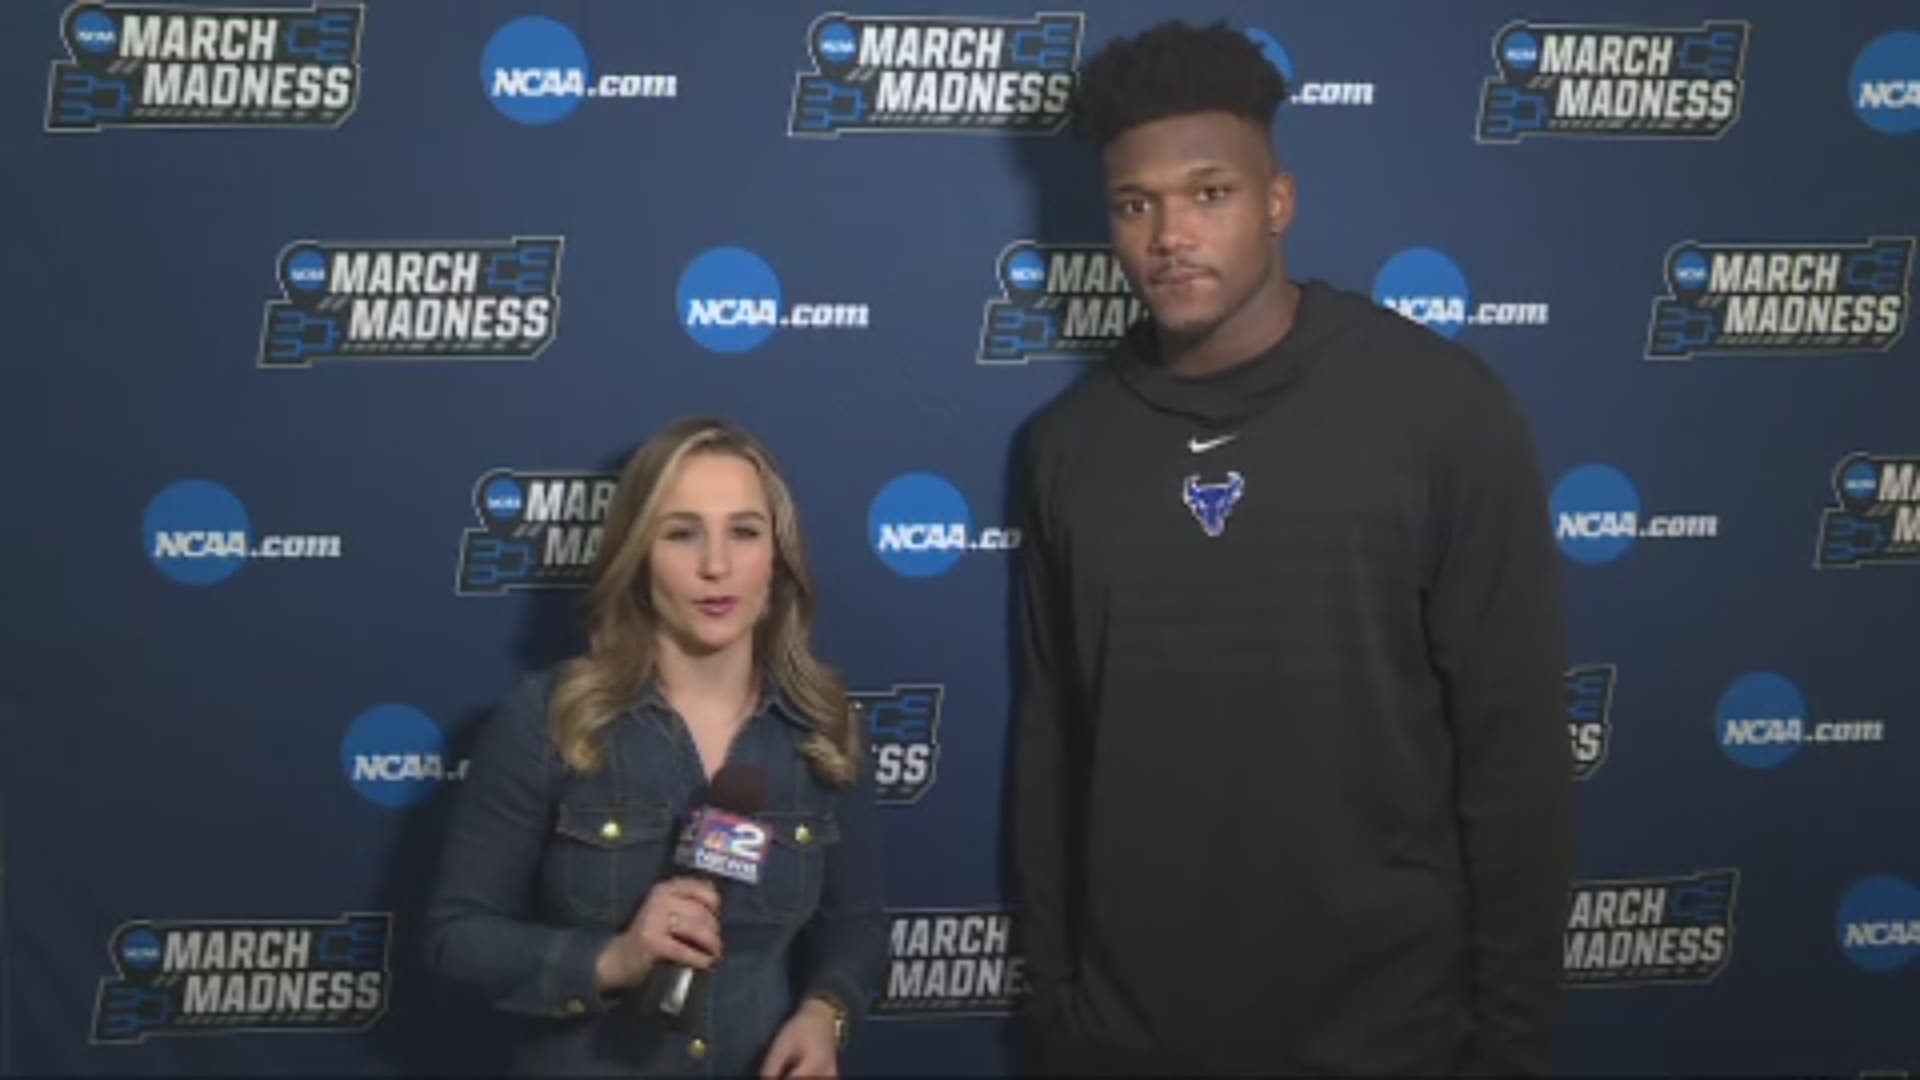 UB takes on Texas Tech in the second round of the NCAA tournament on Sunday after a dominating win over Arizona State on Friday.